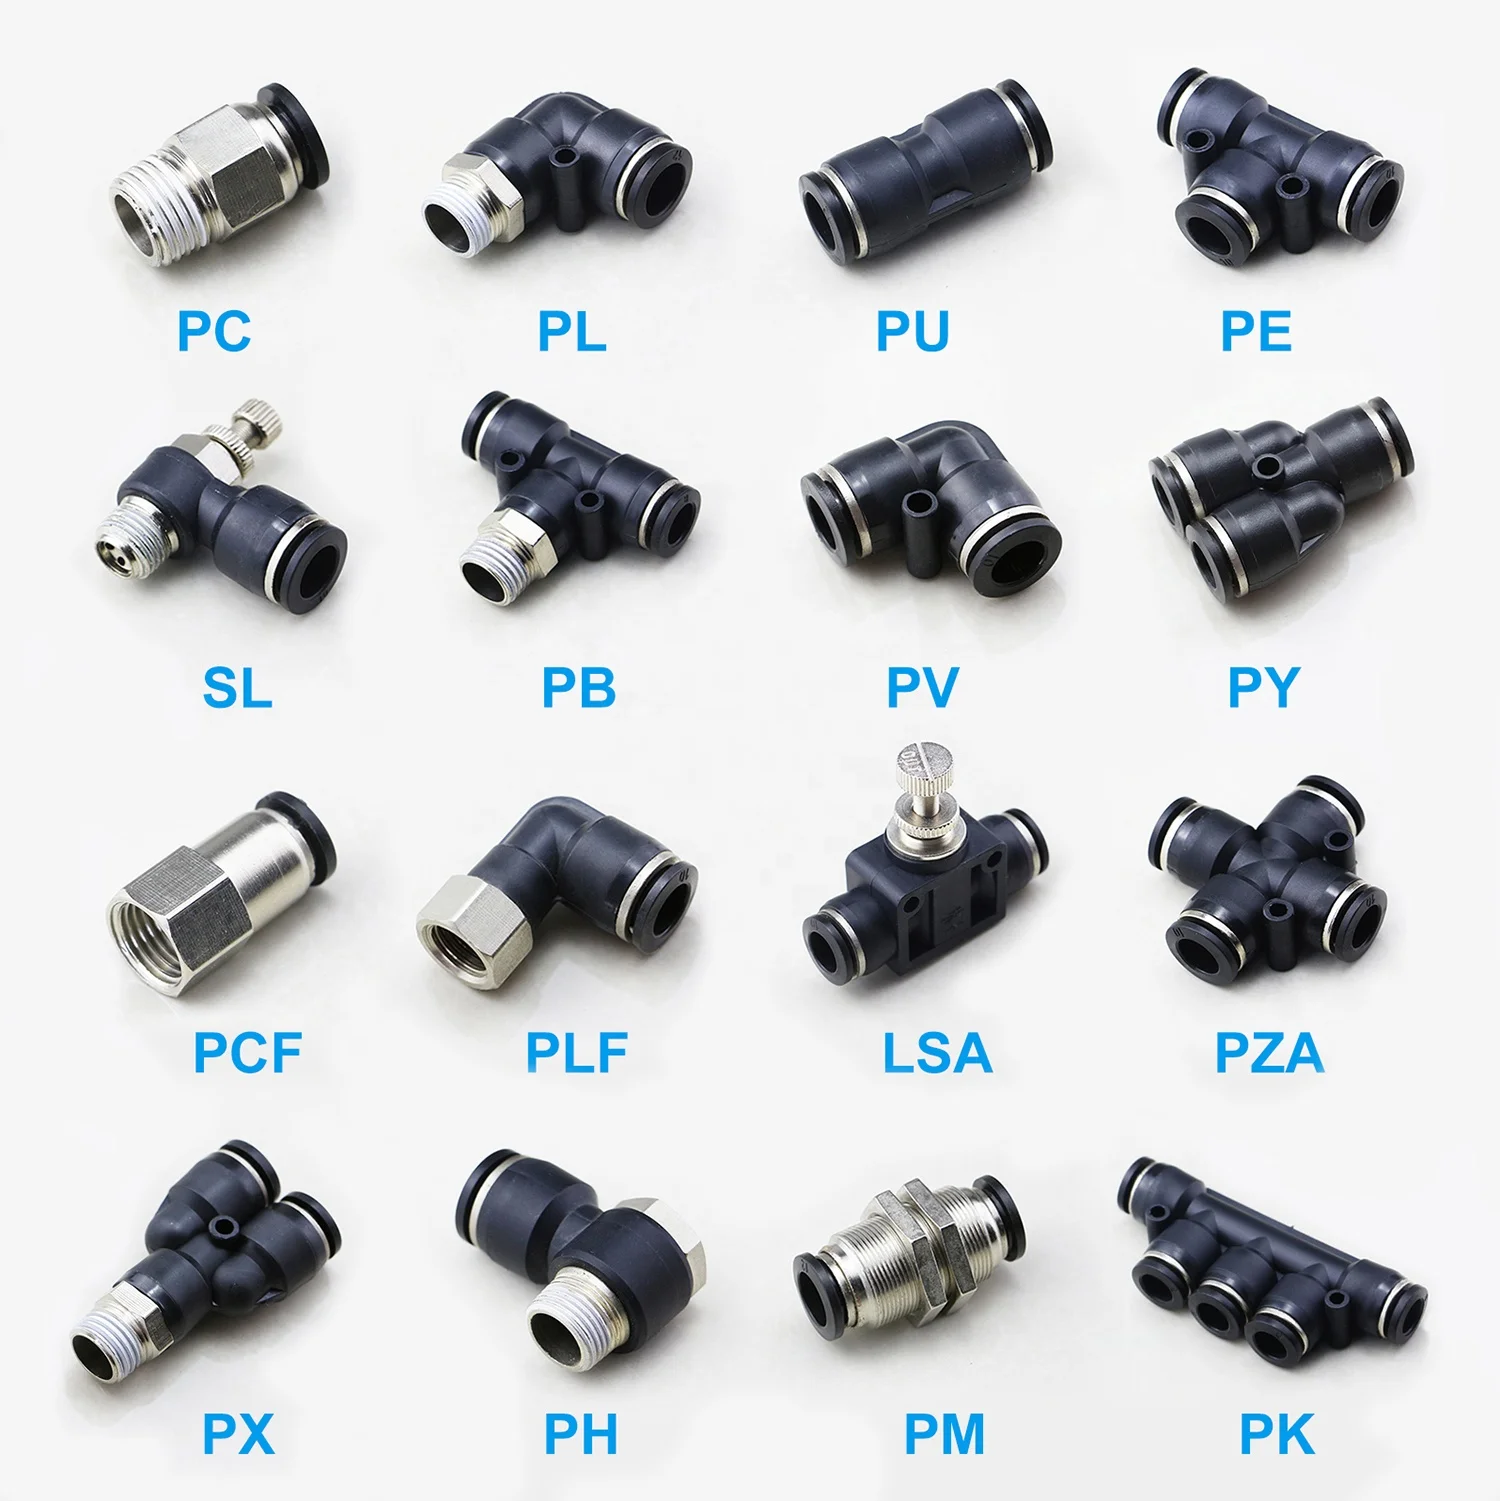 Color : 12mm OD Hose, Specification : M5 Sturdy 10pcs PC Straight Push In Fitting Pneumatic Push To Connect Air 4-12mm OD Hose Tube 1/8 1/4 3/8 1/2BSP Male Thread Connector 